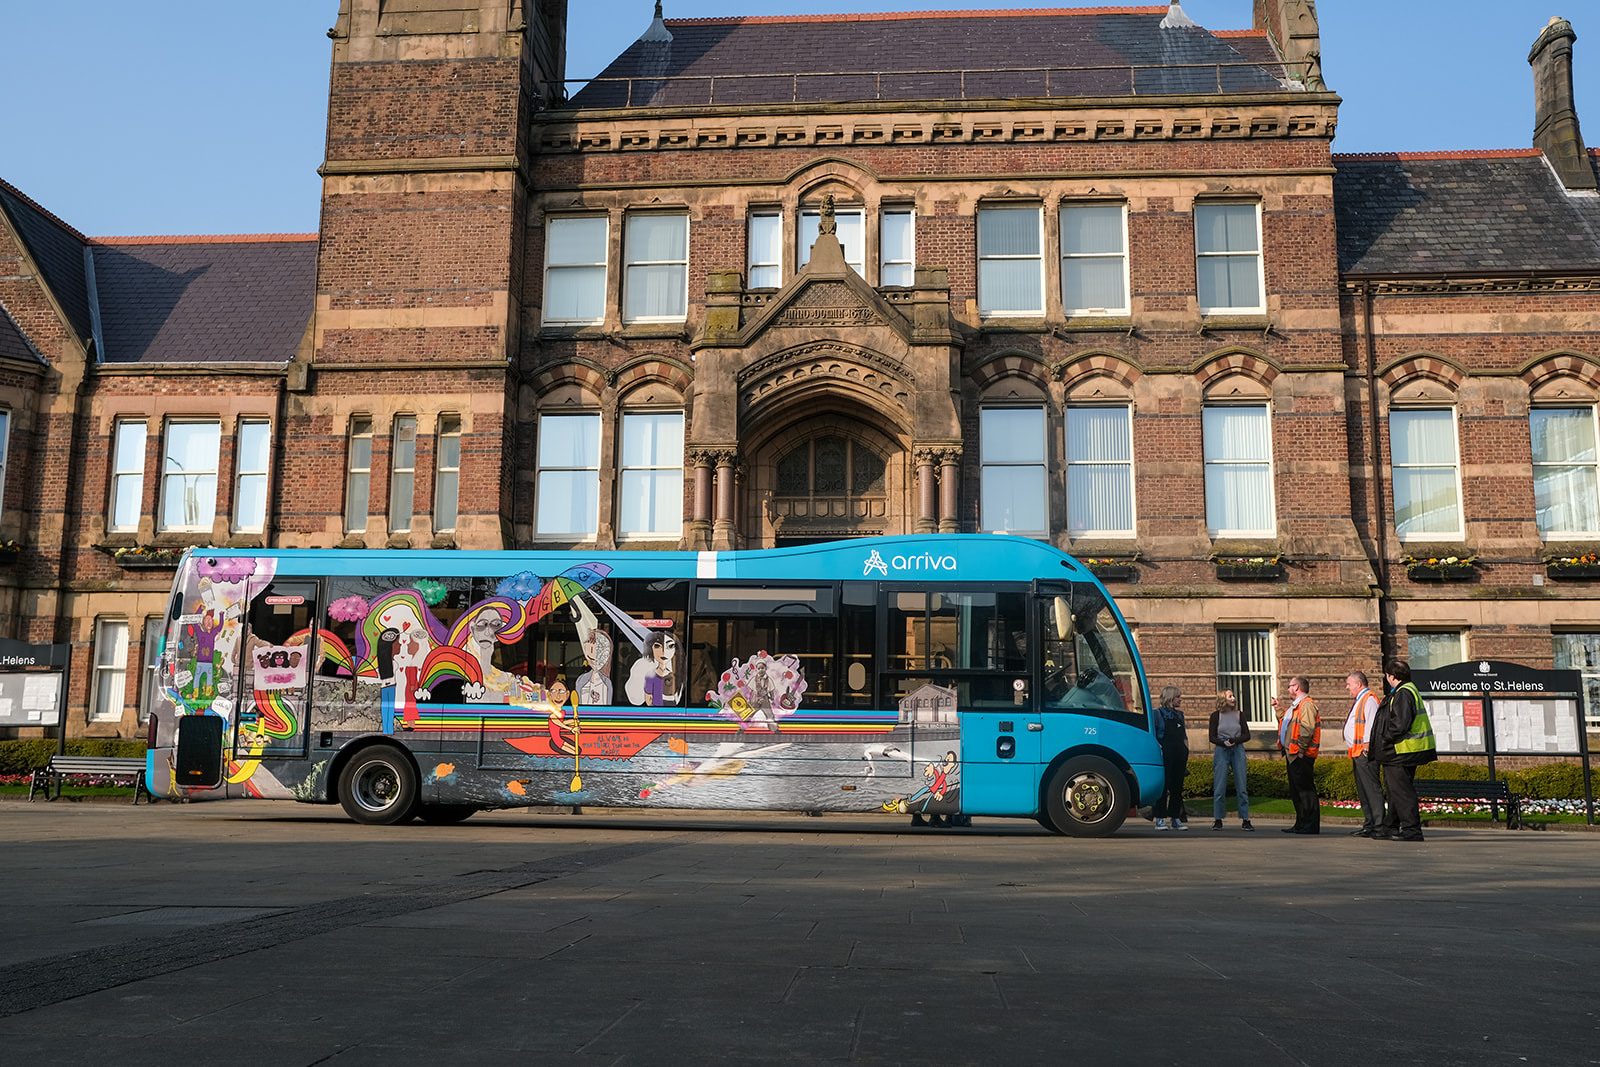 An Arriva North West bus is parked in front of St Helens Town Hall. The bus is decorated with colourful illustrated designs of rainbows, people and a big rainbow coloured umbrella.